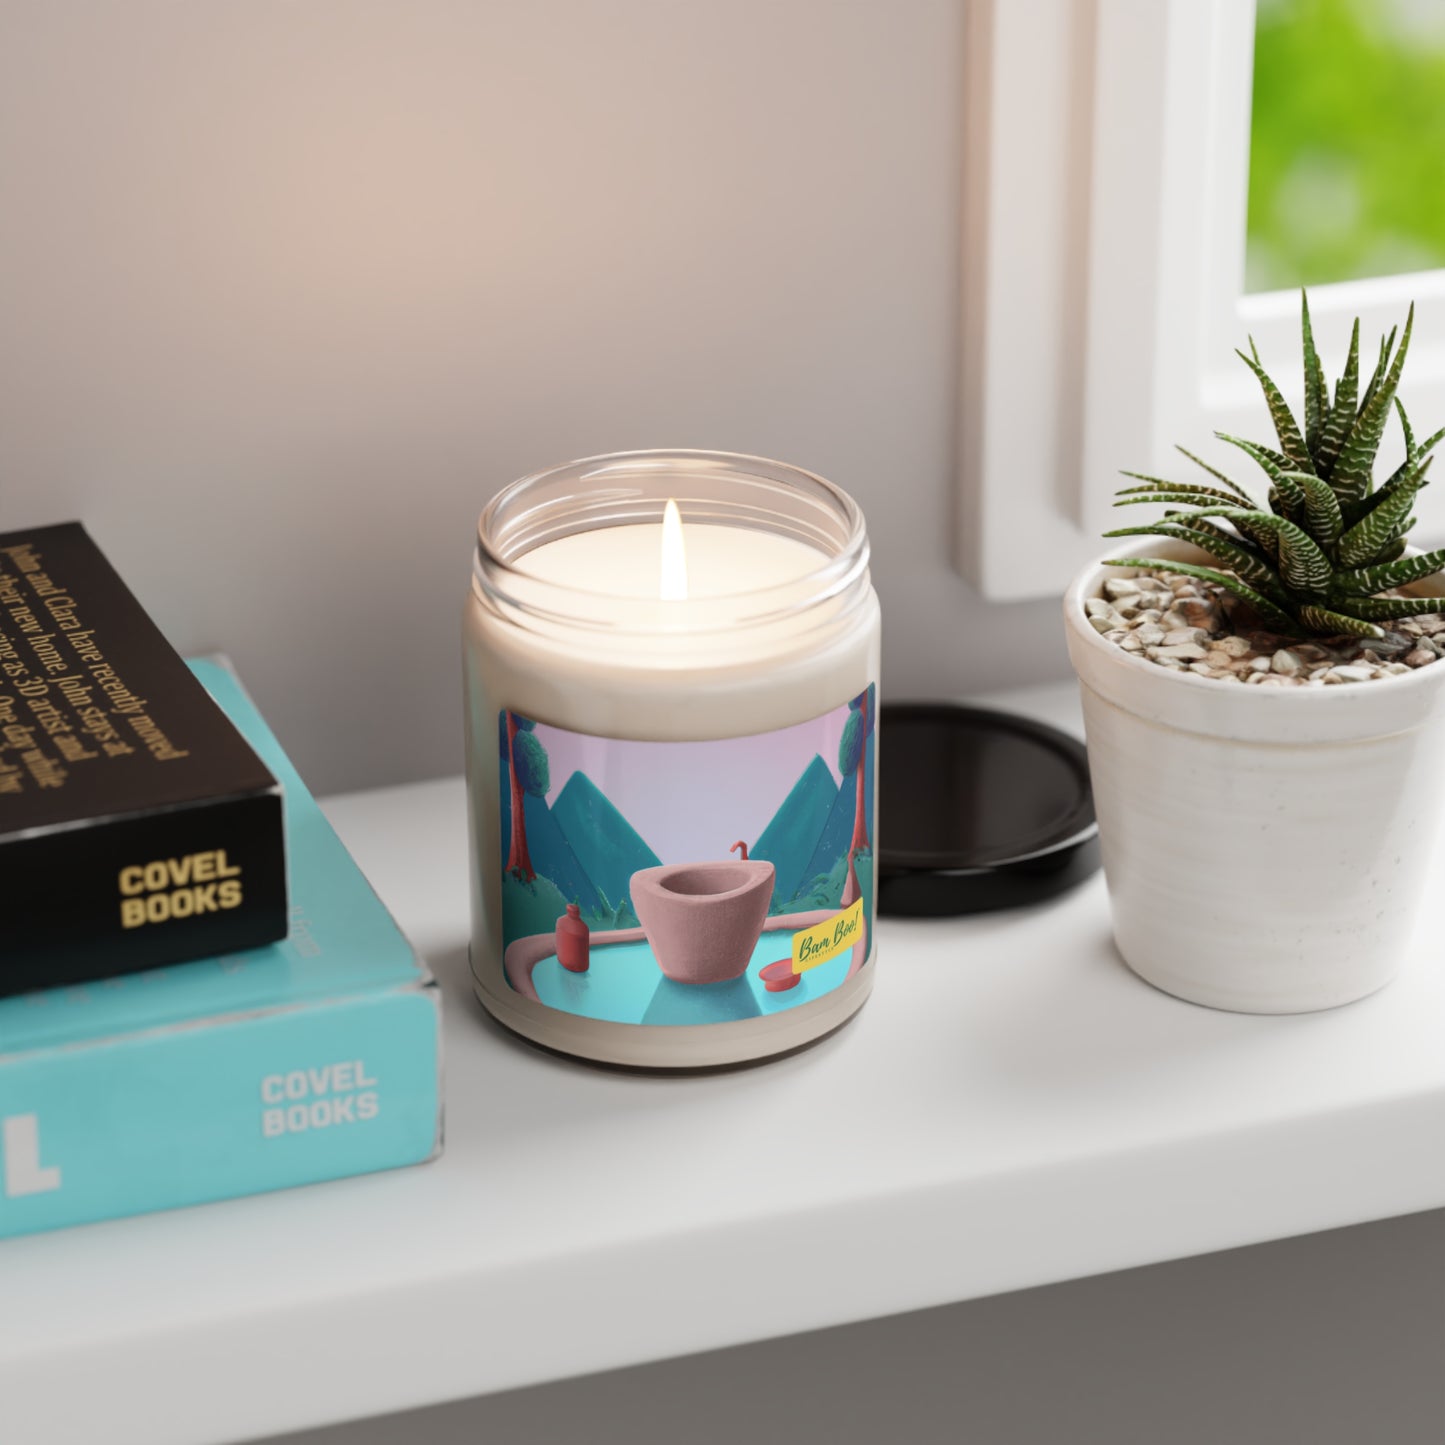 Dreamscaping: Crafting a Creative Landscape of Imagination - Bam Boo! Lifestyle Eco-friendly Soy Candle